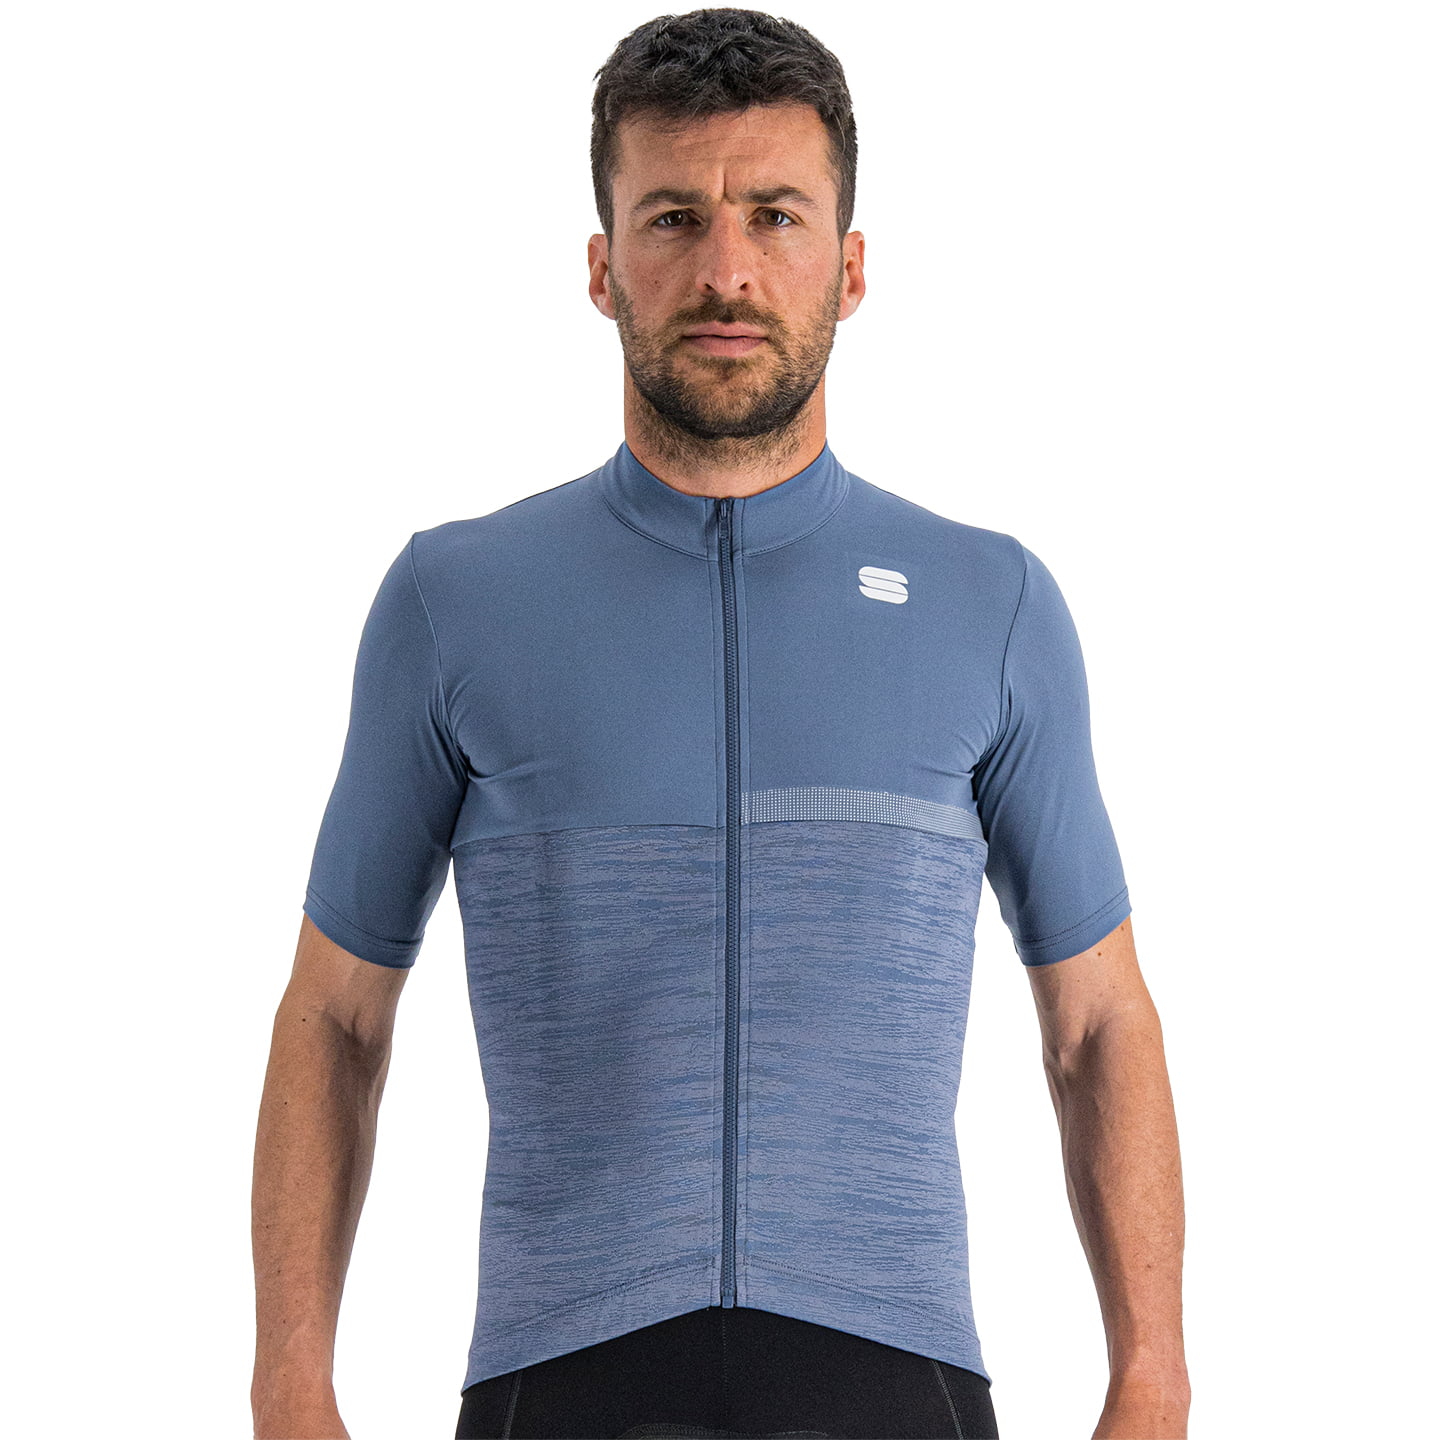 SPORTFUL Giara Short Sleeve Jersey, for men, size 2XL, Cycling jersey, Cycle clothing